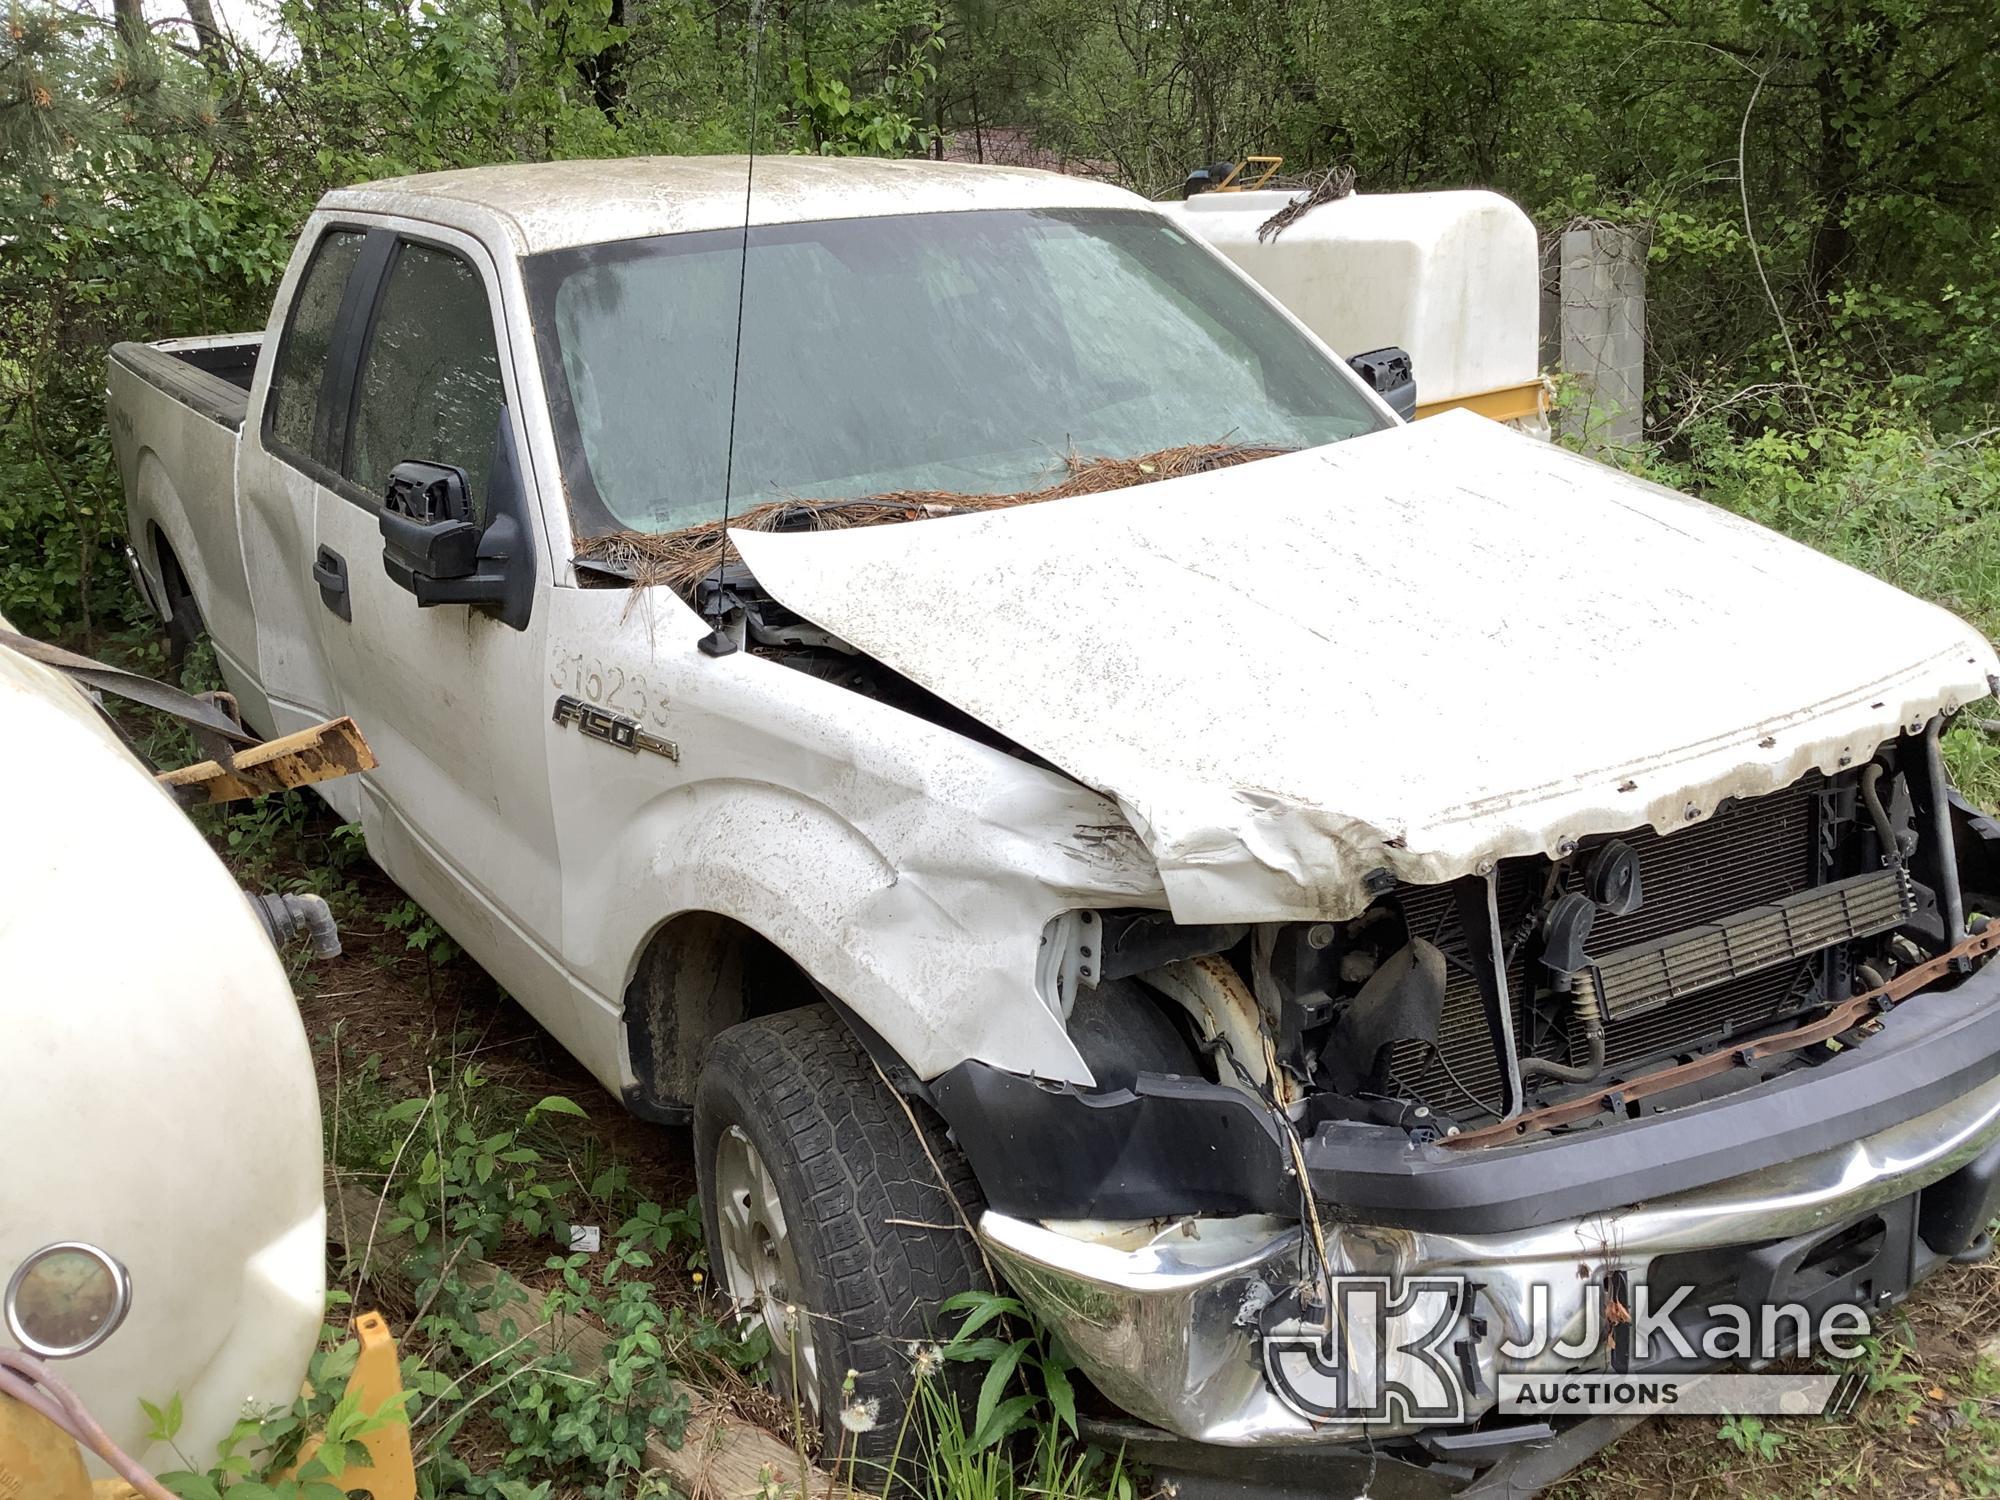 (Cumming, GA) 2014 Ford F150 4x4 Extended-Cab Pickup Truck Wrecked, Not Running, Condition Unknown,